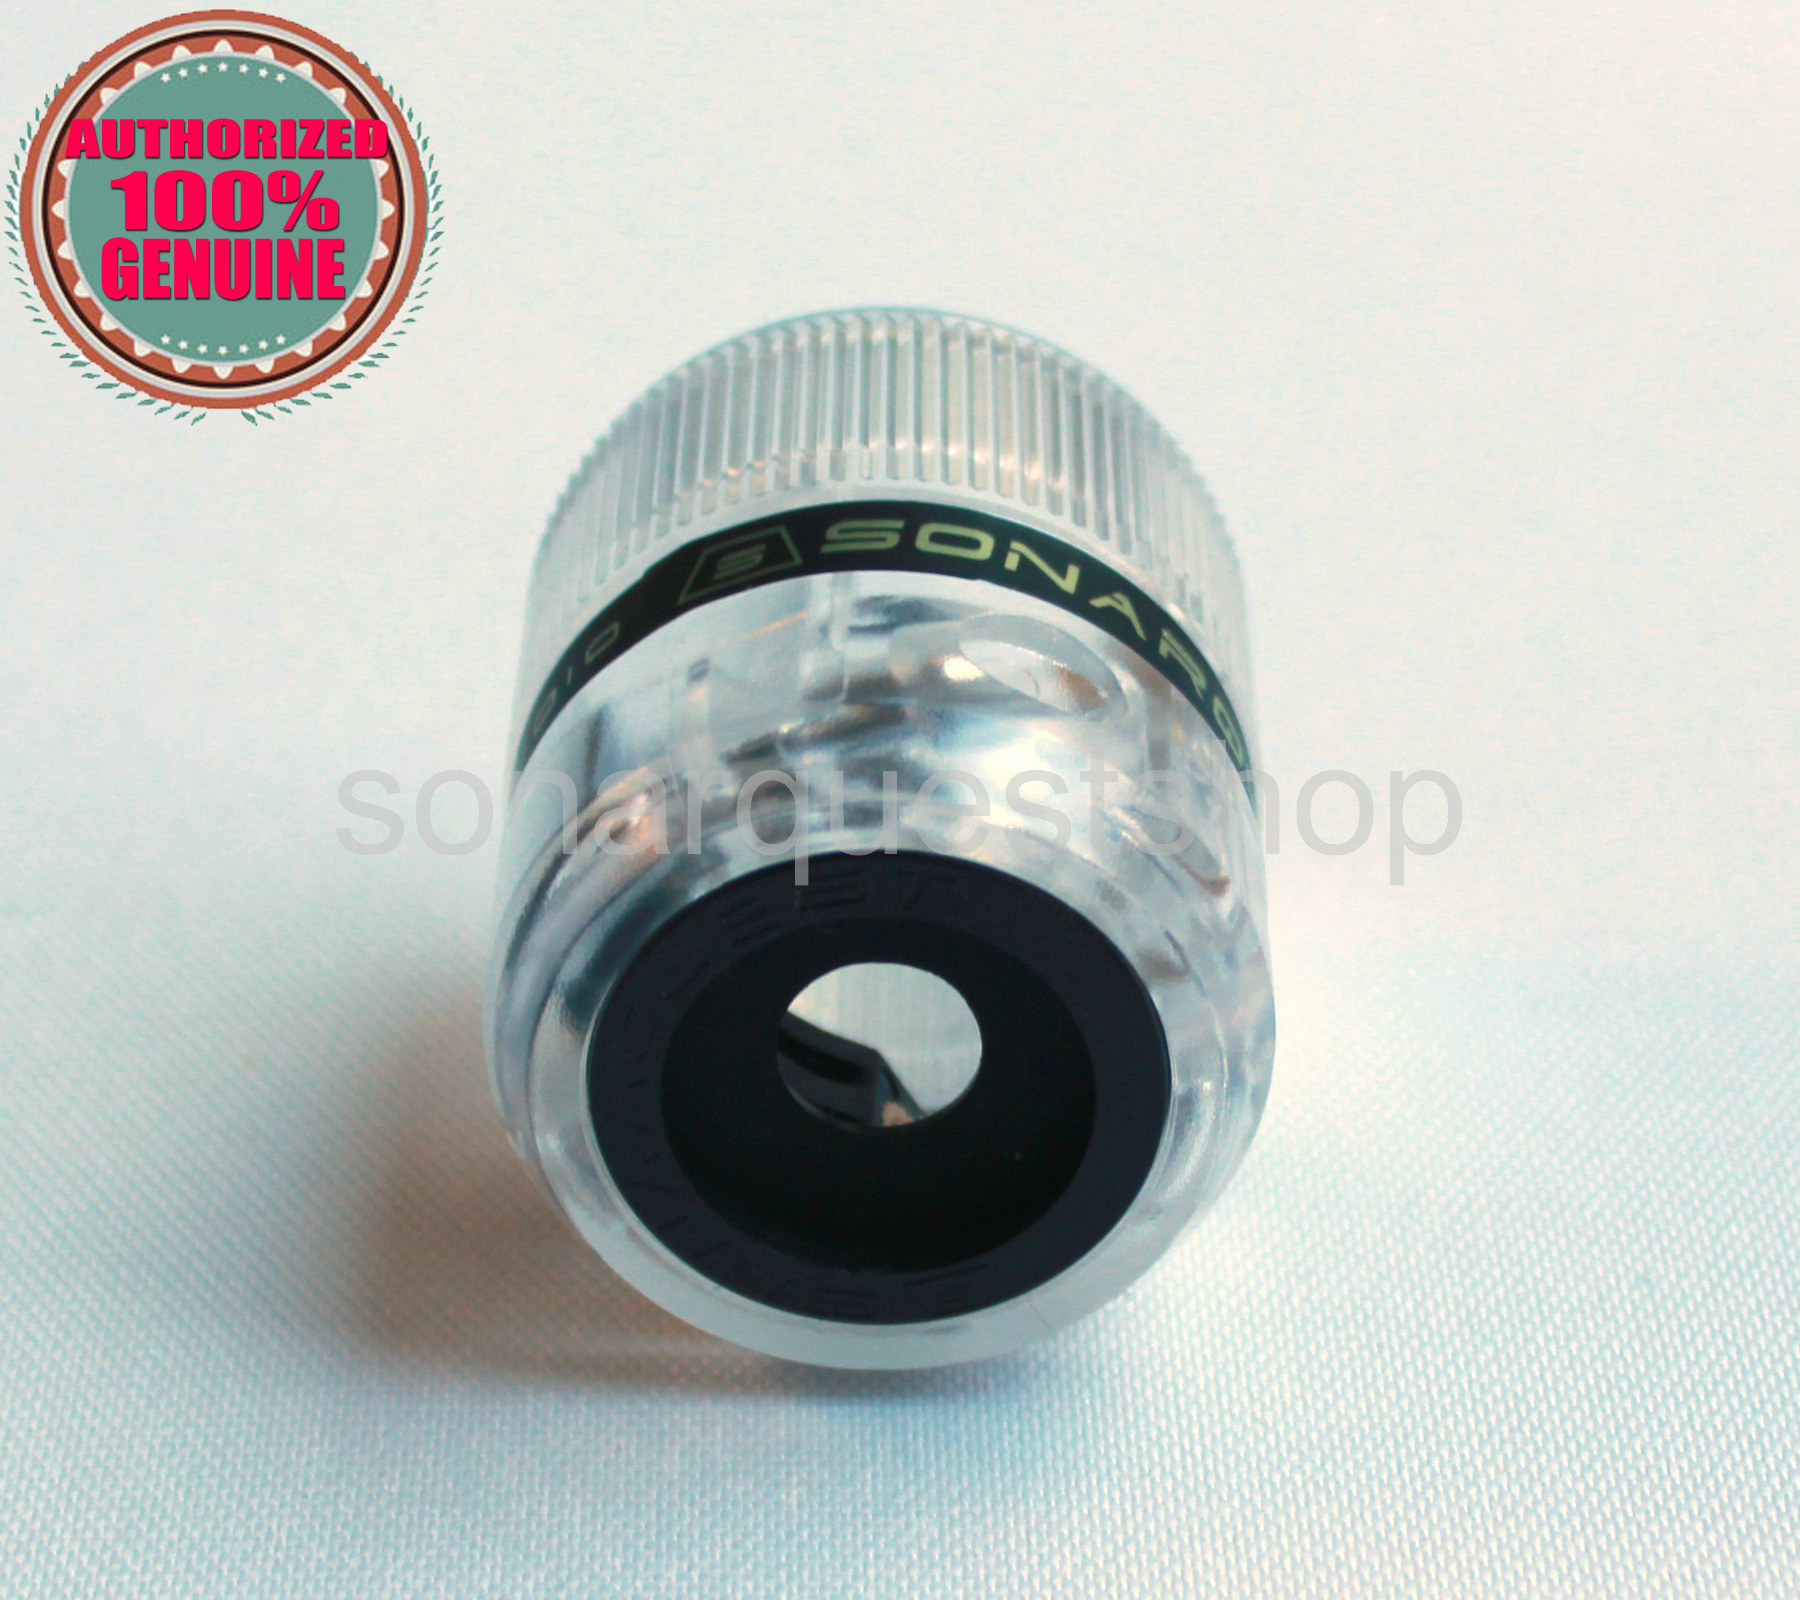 SONARQUEST ST-AgC(B) Silver Plated Translucent IEC Connector